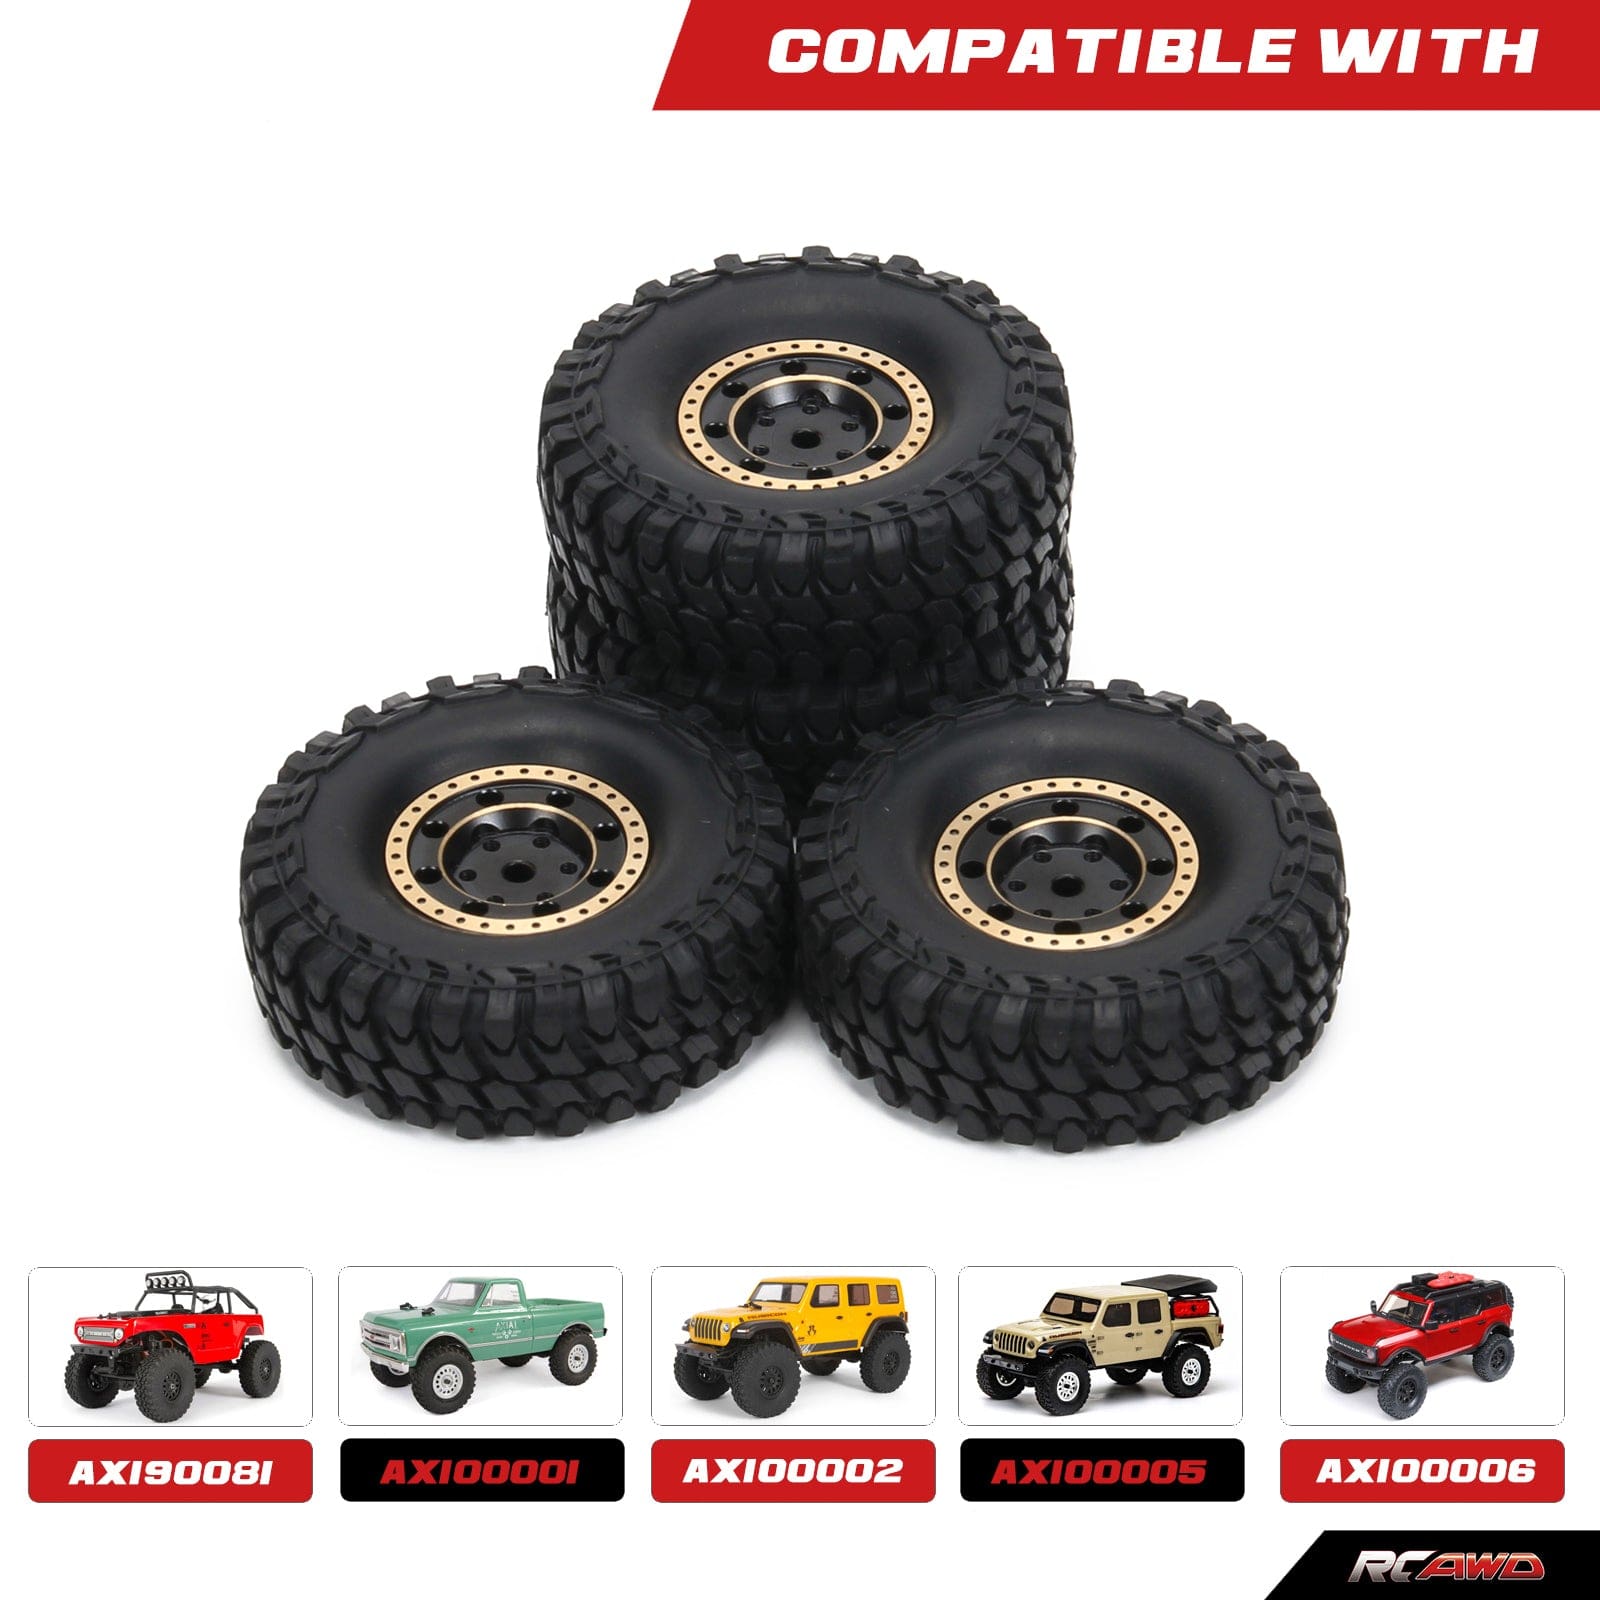 RCAWD 4pcs 1.0" 54*19mm Brass Beadlock Tires for SCX24 RC Crawler - RCAWD